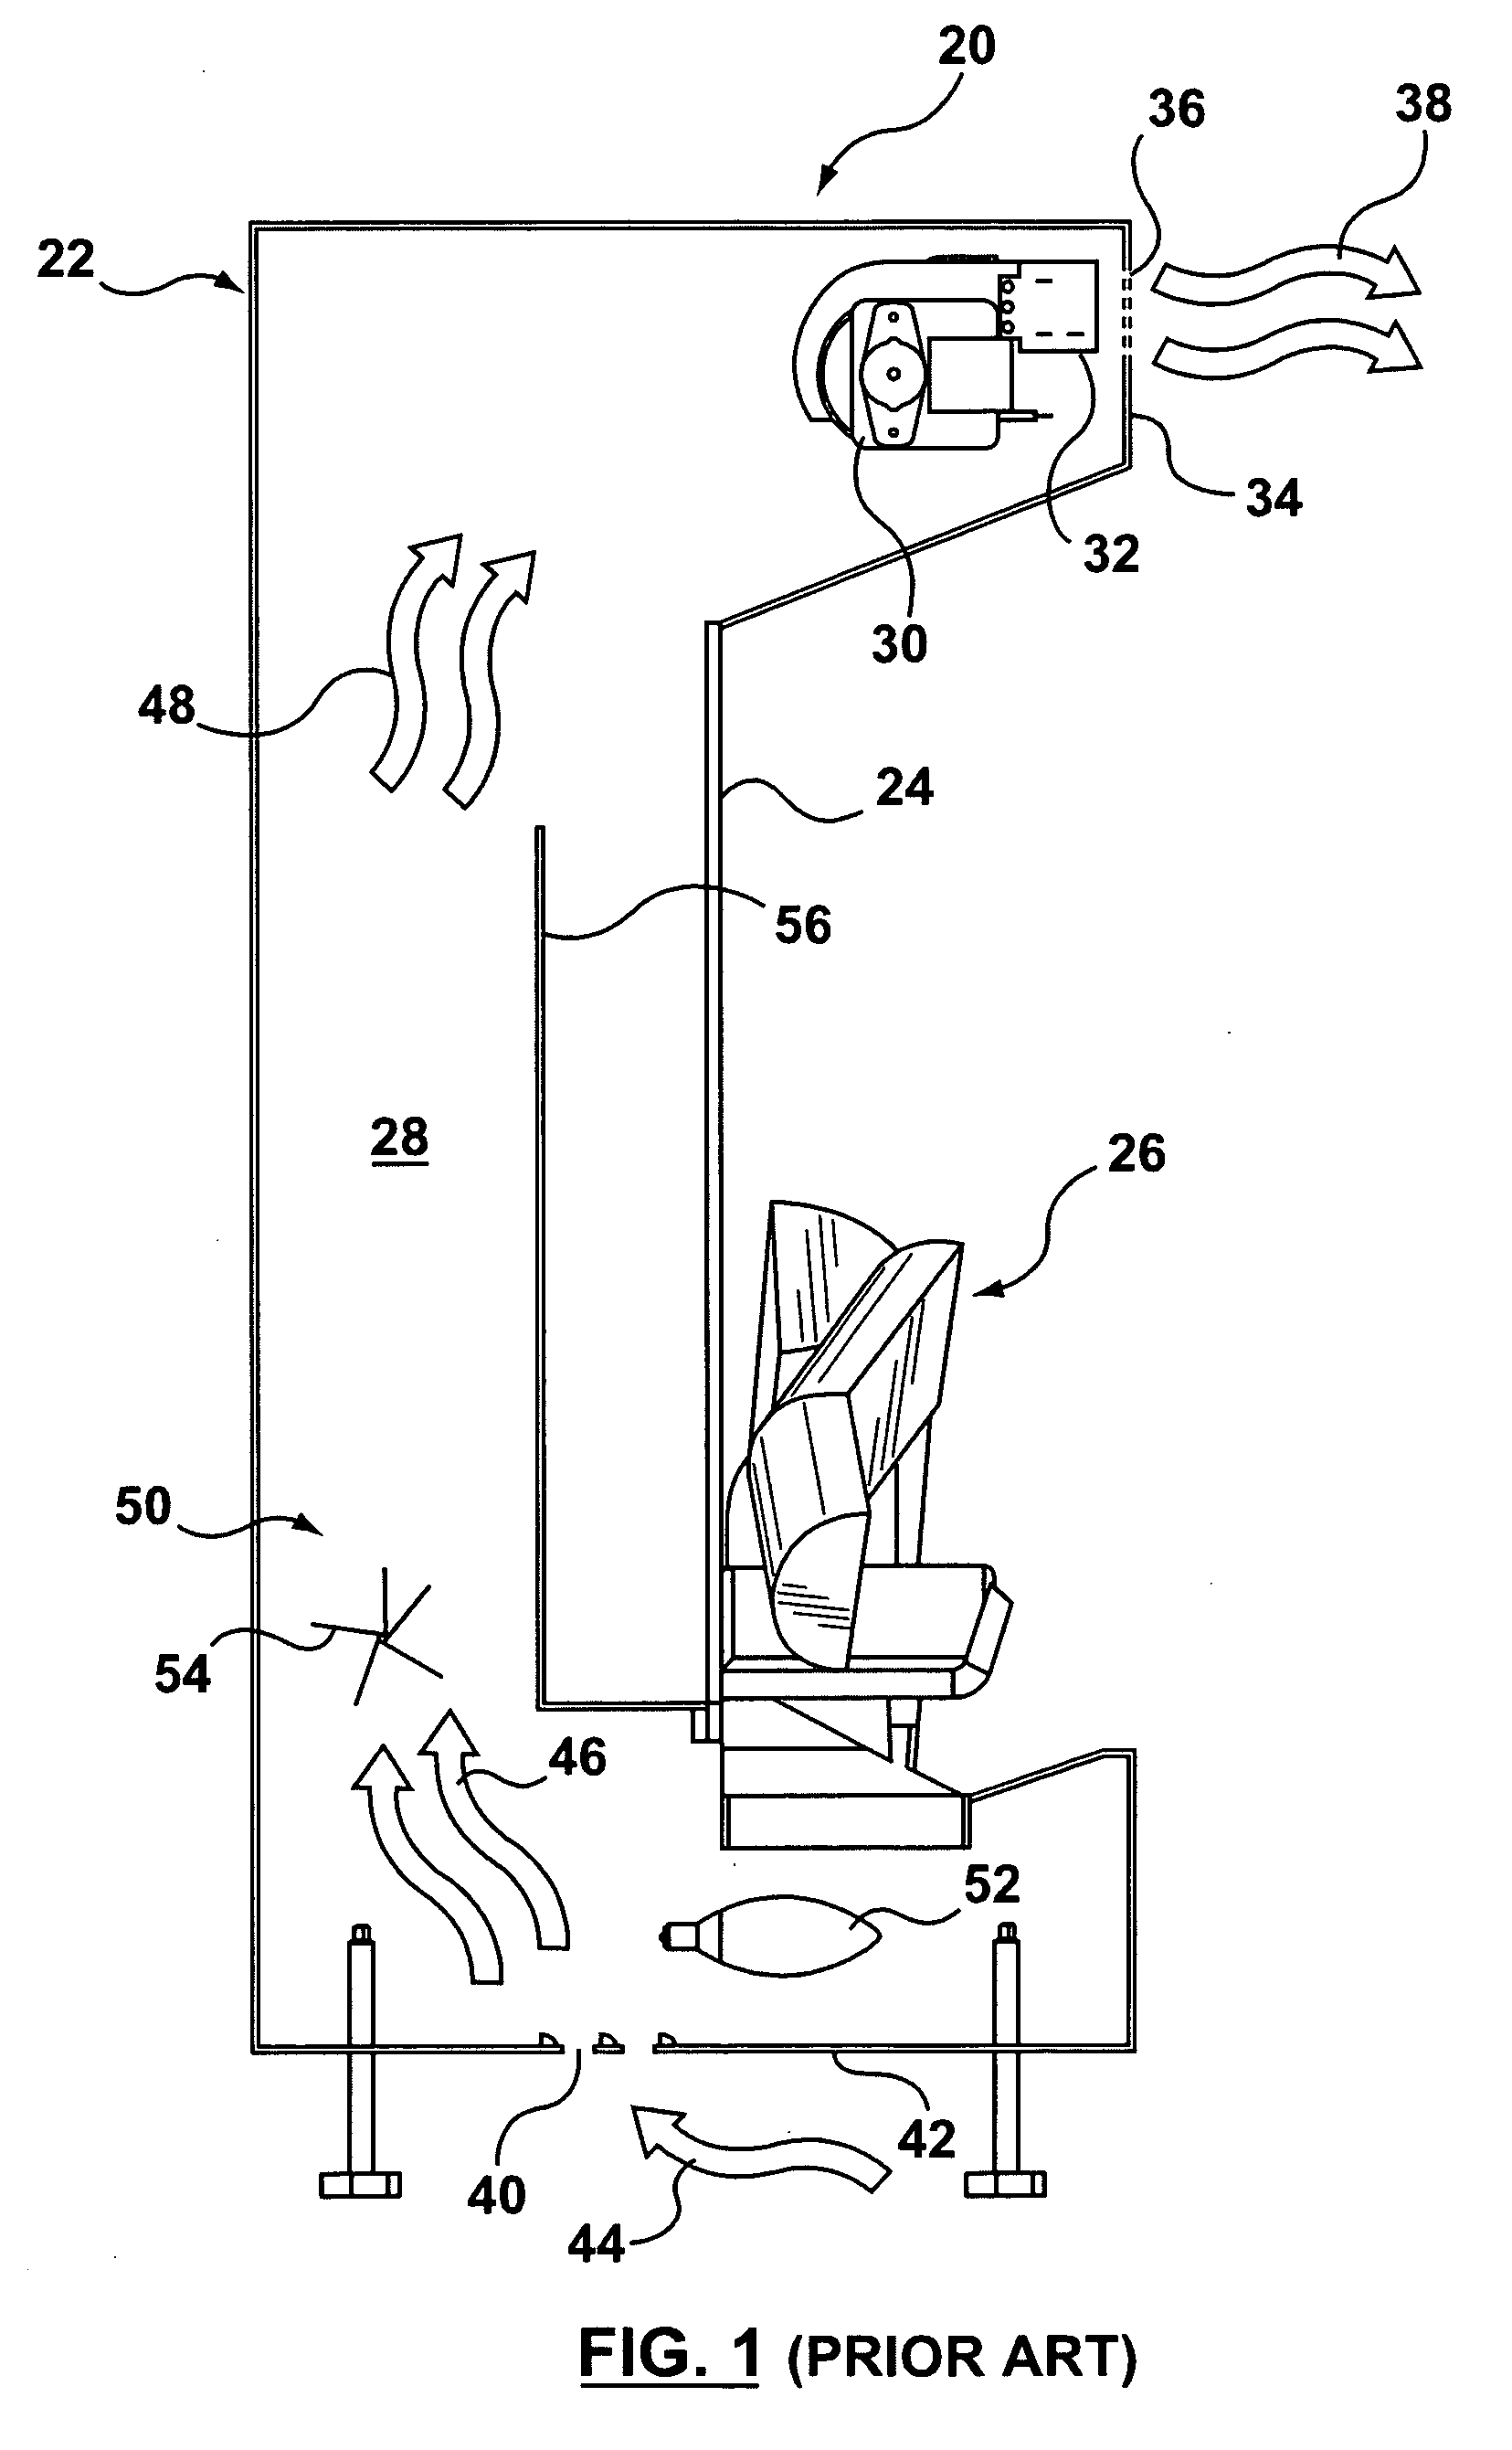 Flame simulating assembly including an air filter